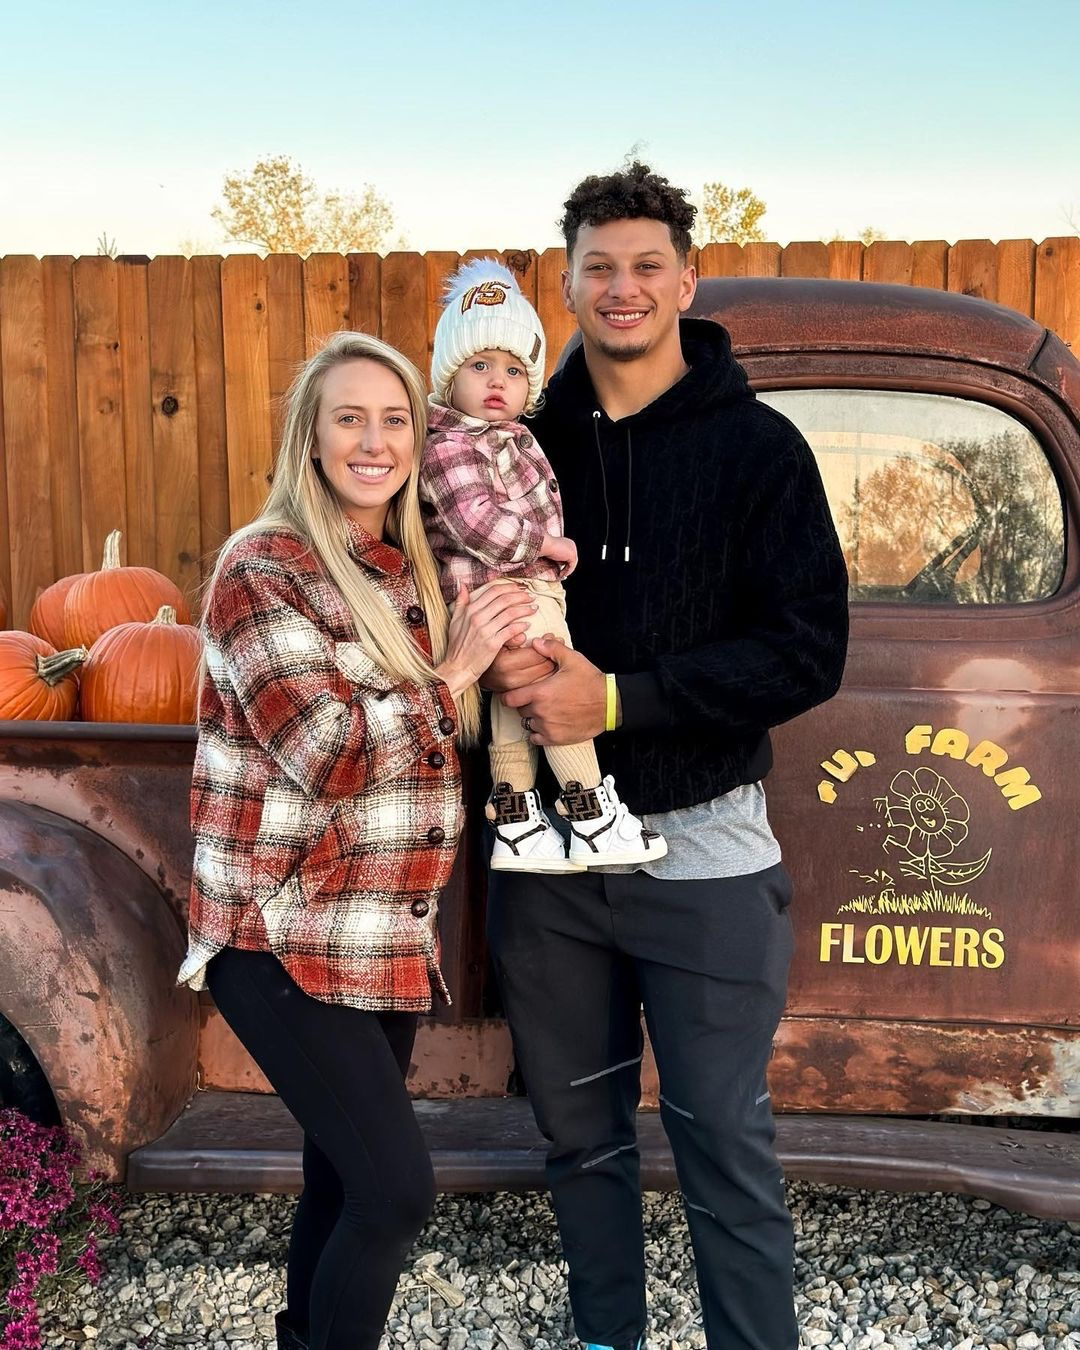 Brittany Mahomes Shared How Patrick Is the 'Best Father Ever' – SheKnows